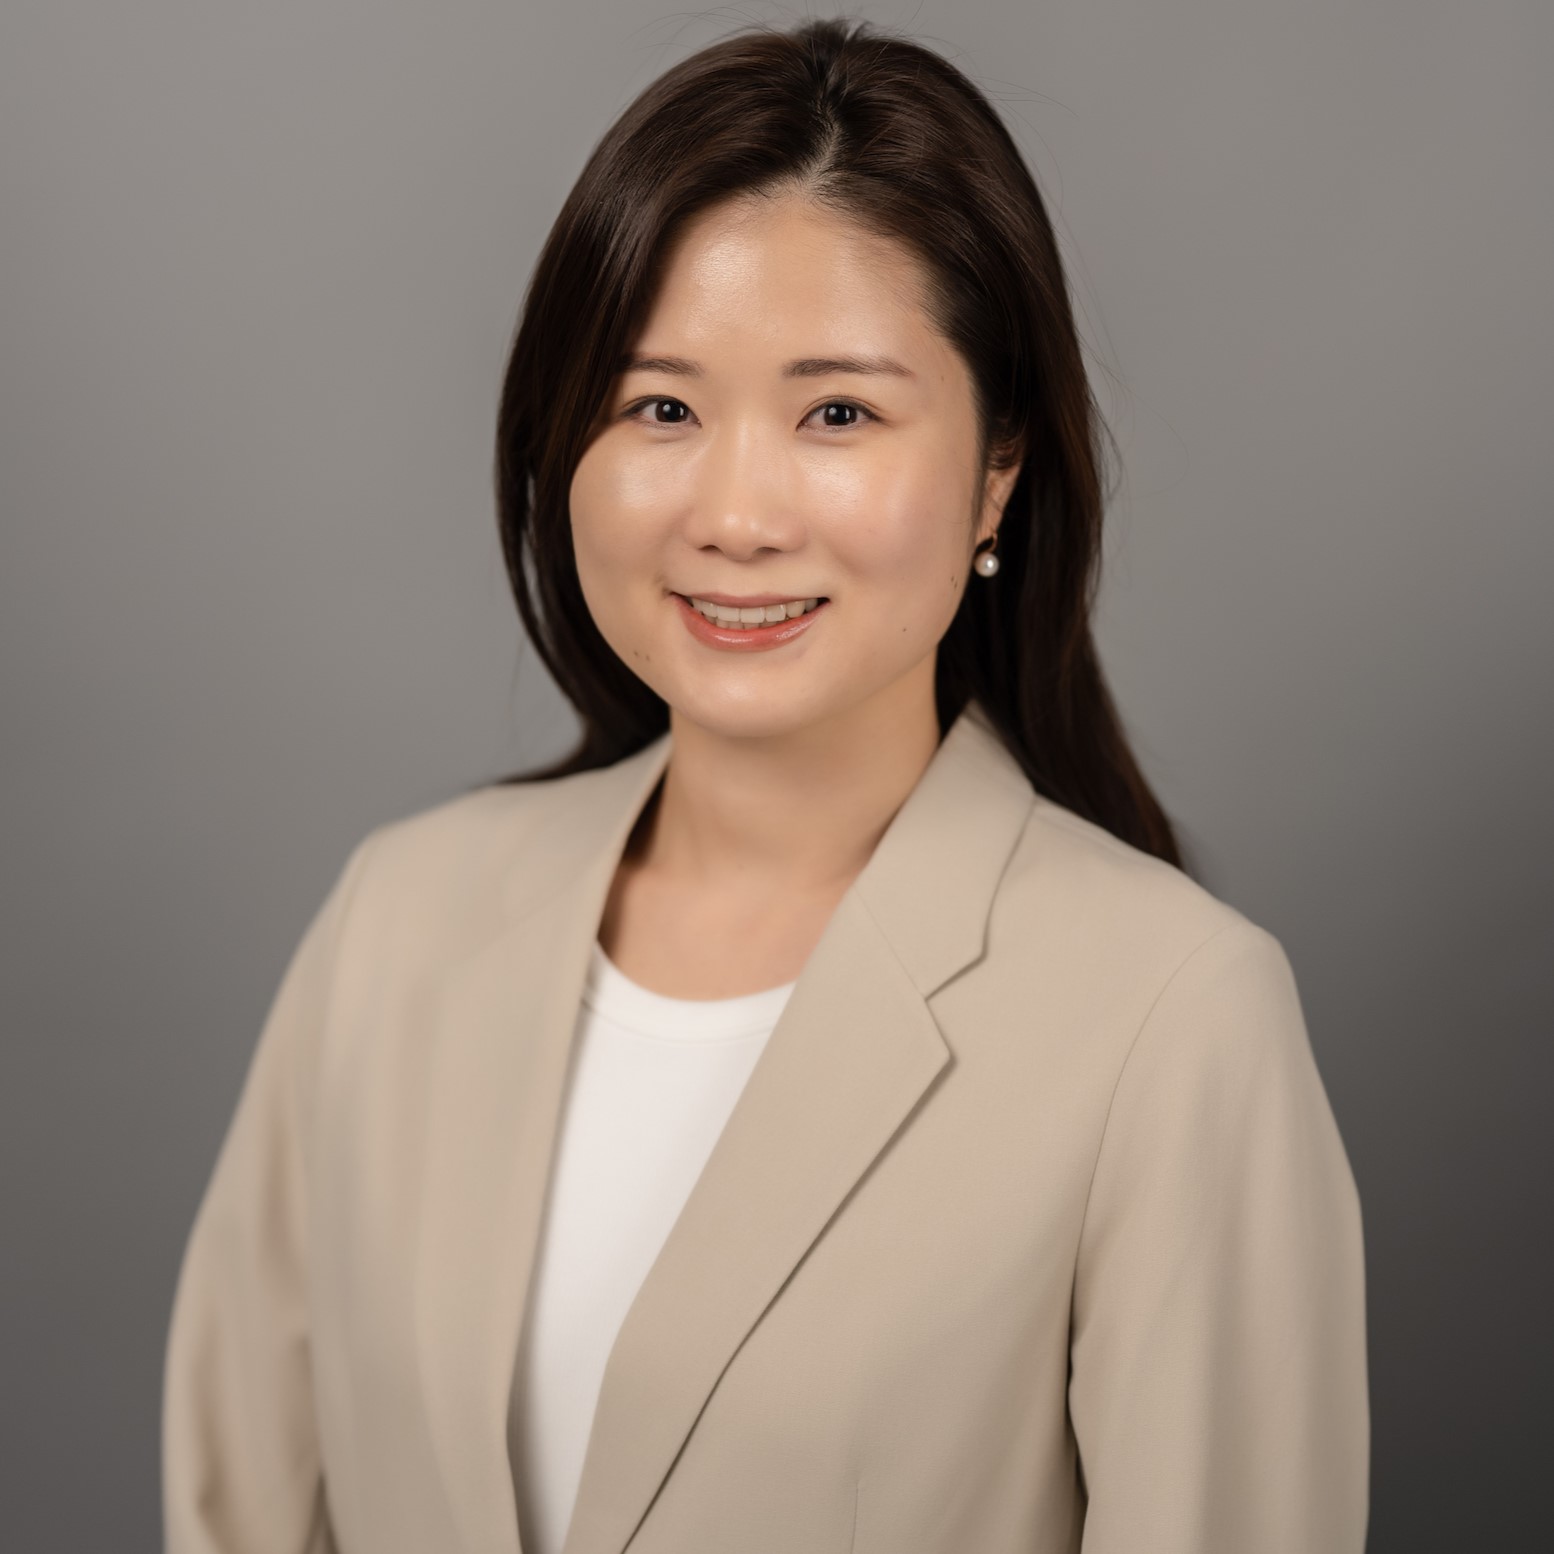 Dr. Yeonji Jung